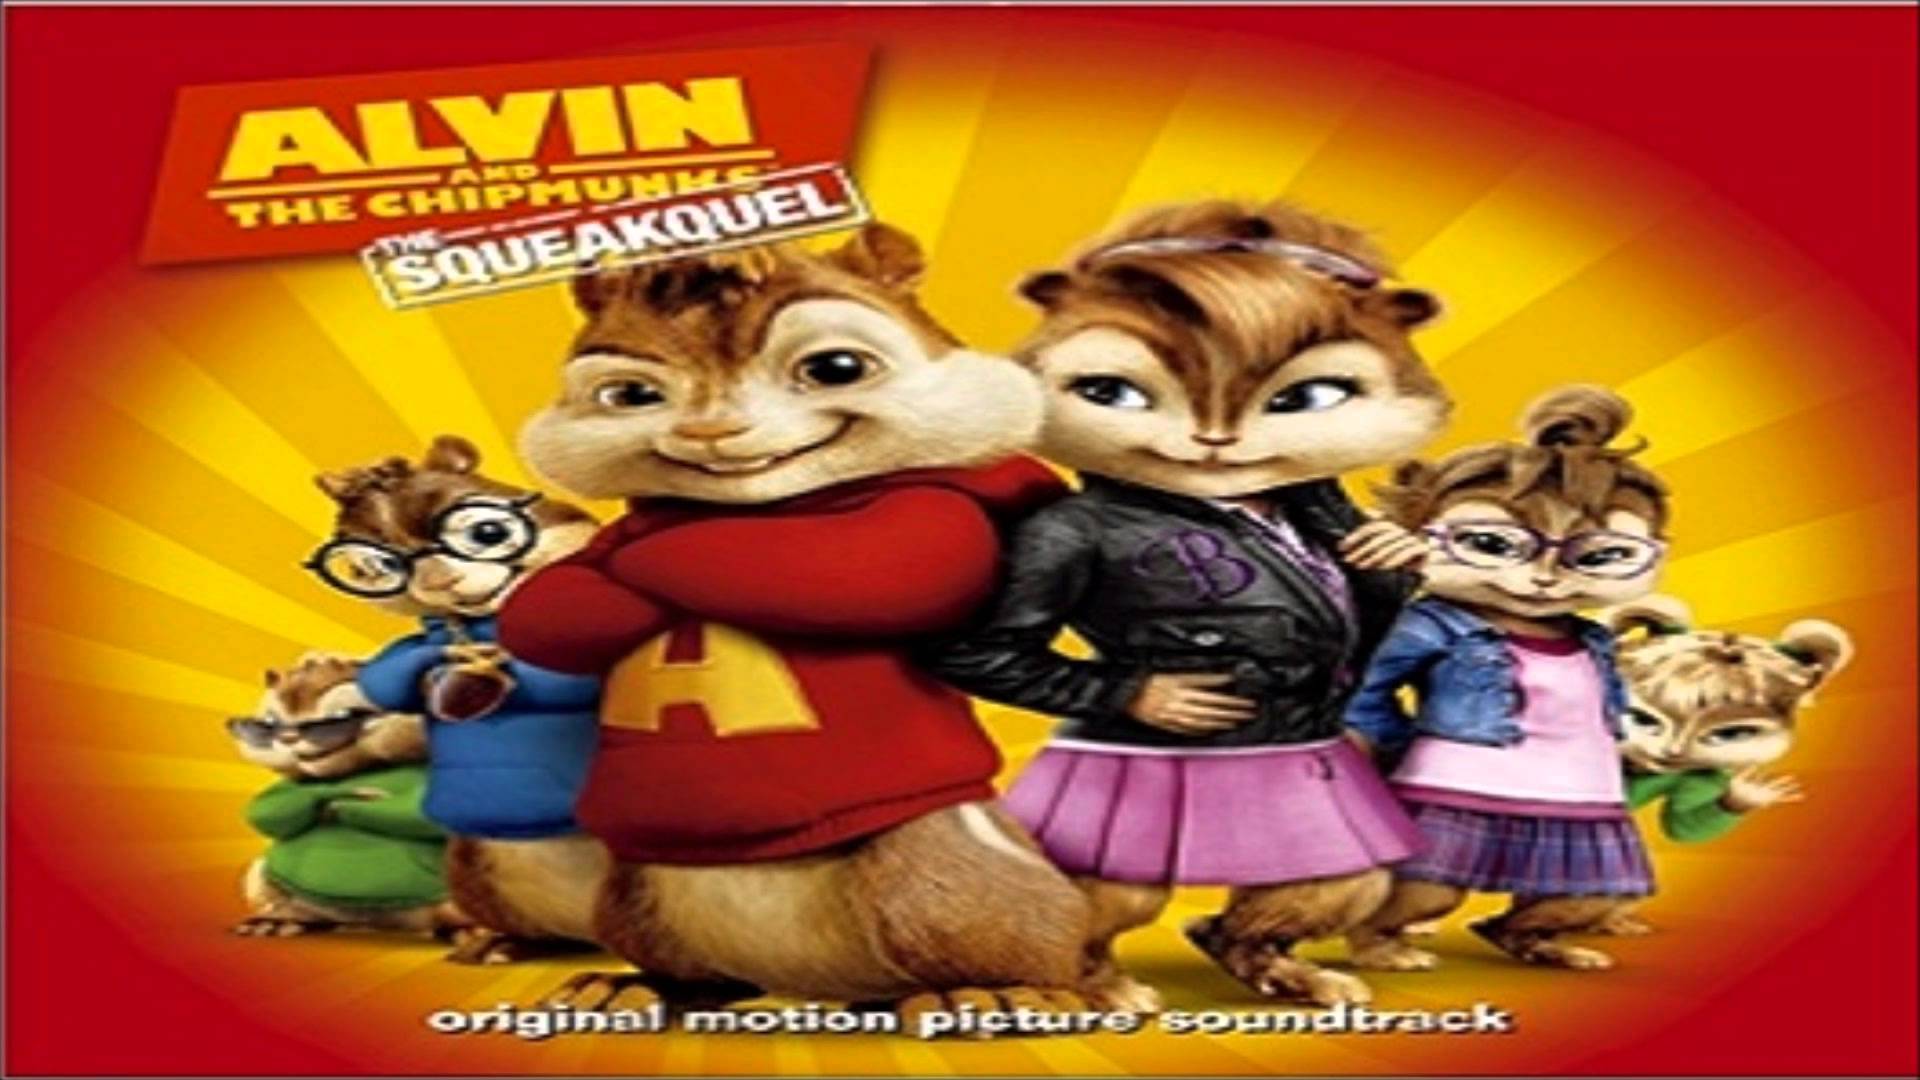 Alvin And The Chipmunks: The Squeakquel #2